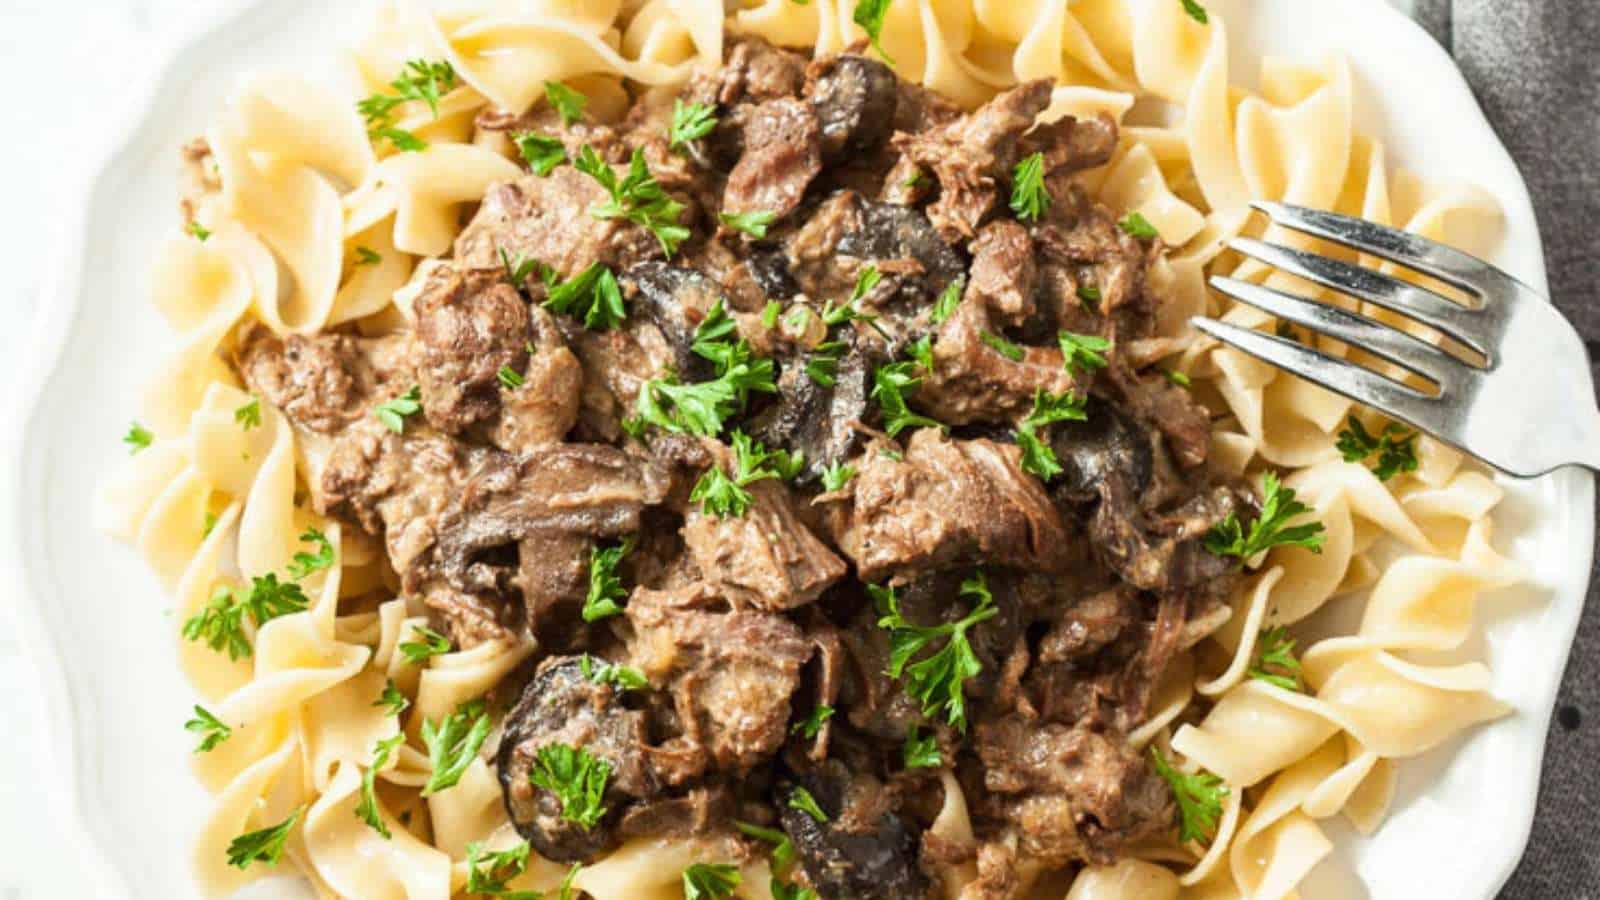 Beef stroganoff with pasta on a plate with a fork.